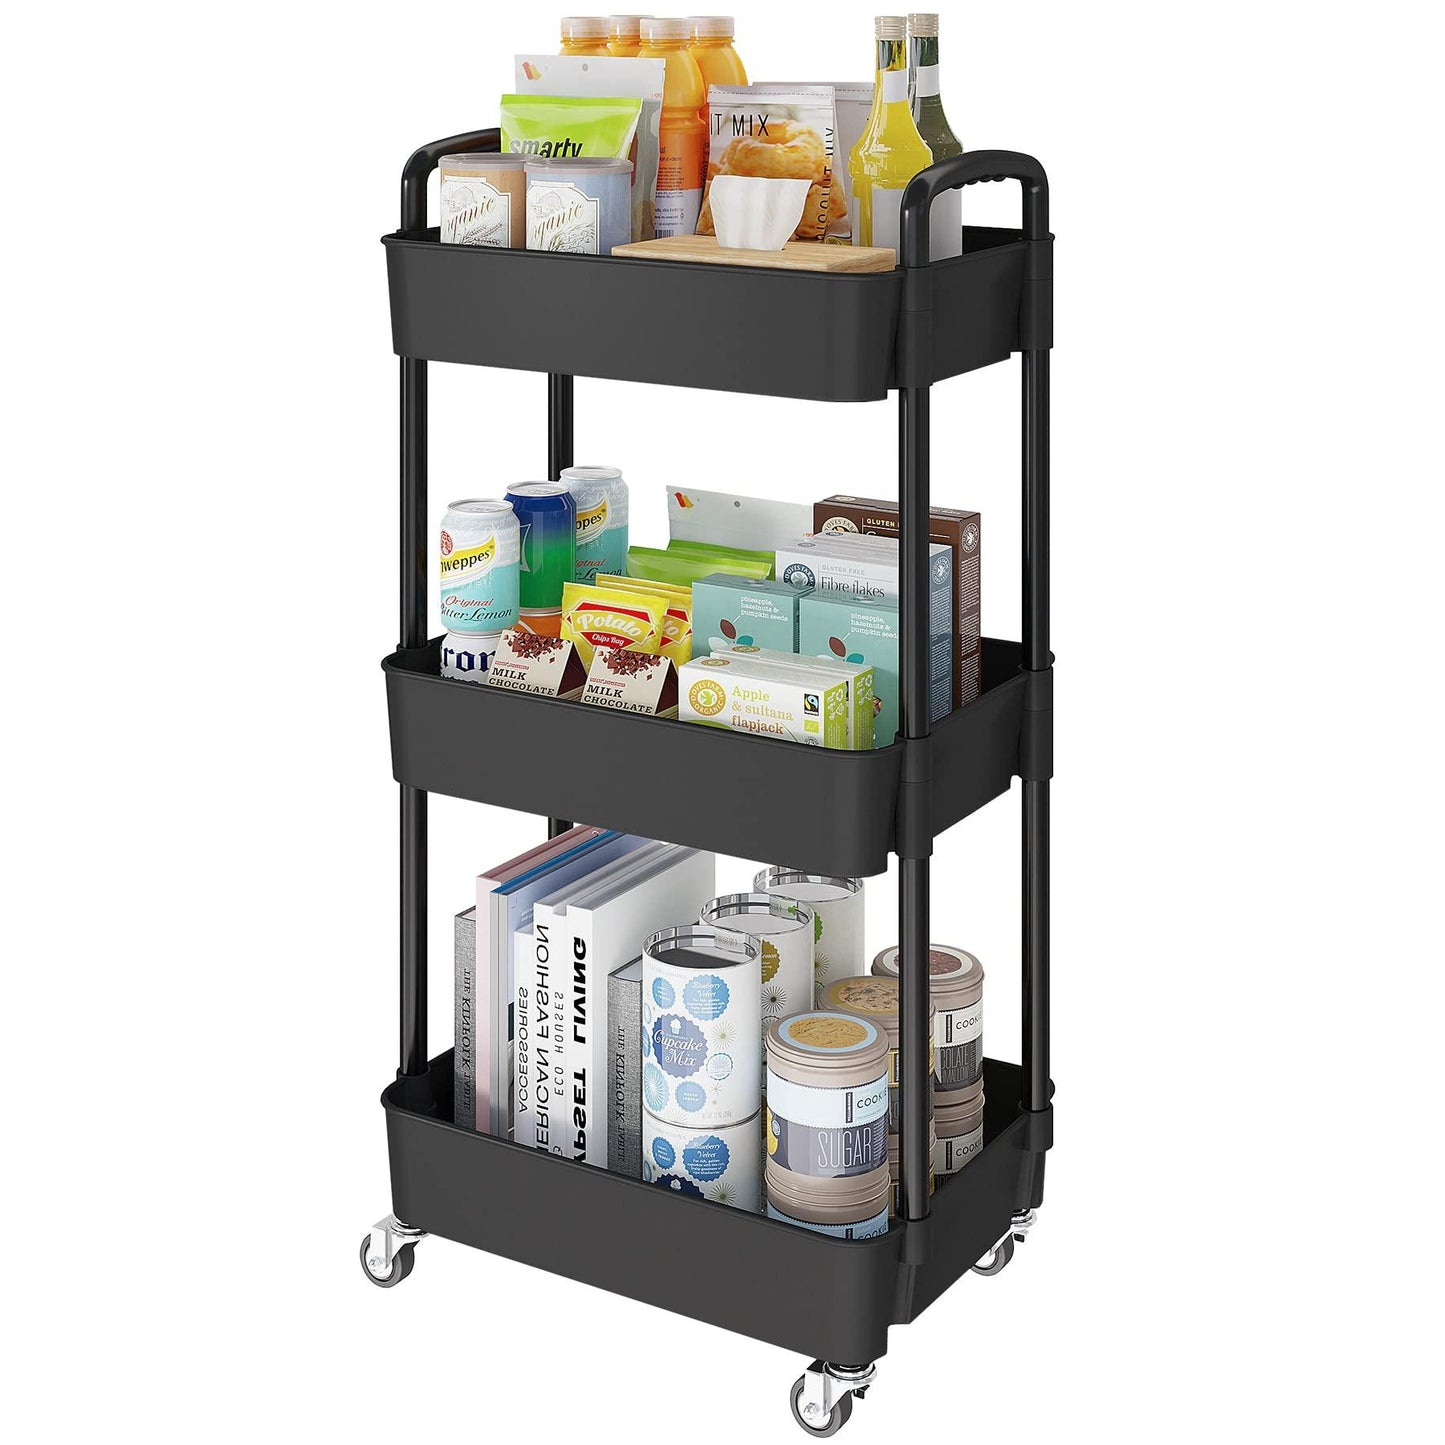 Laiensia 3-Tier Kitchen Storage Cart,Multifunction Utility Rolling Storage Organizer,Mobile Shelving Unit Cart with Lockable Wheels for Bathroom,Laundry,Living Room,With Classified Stickers,Black - CookCave